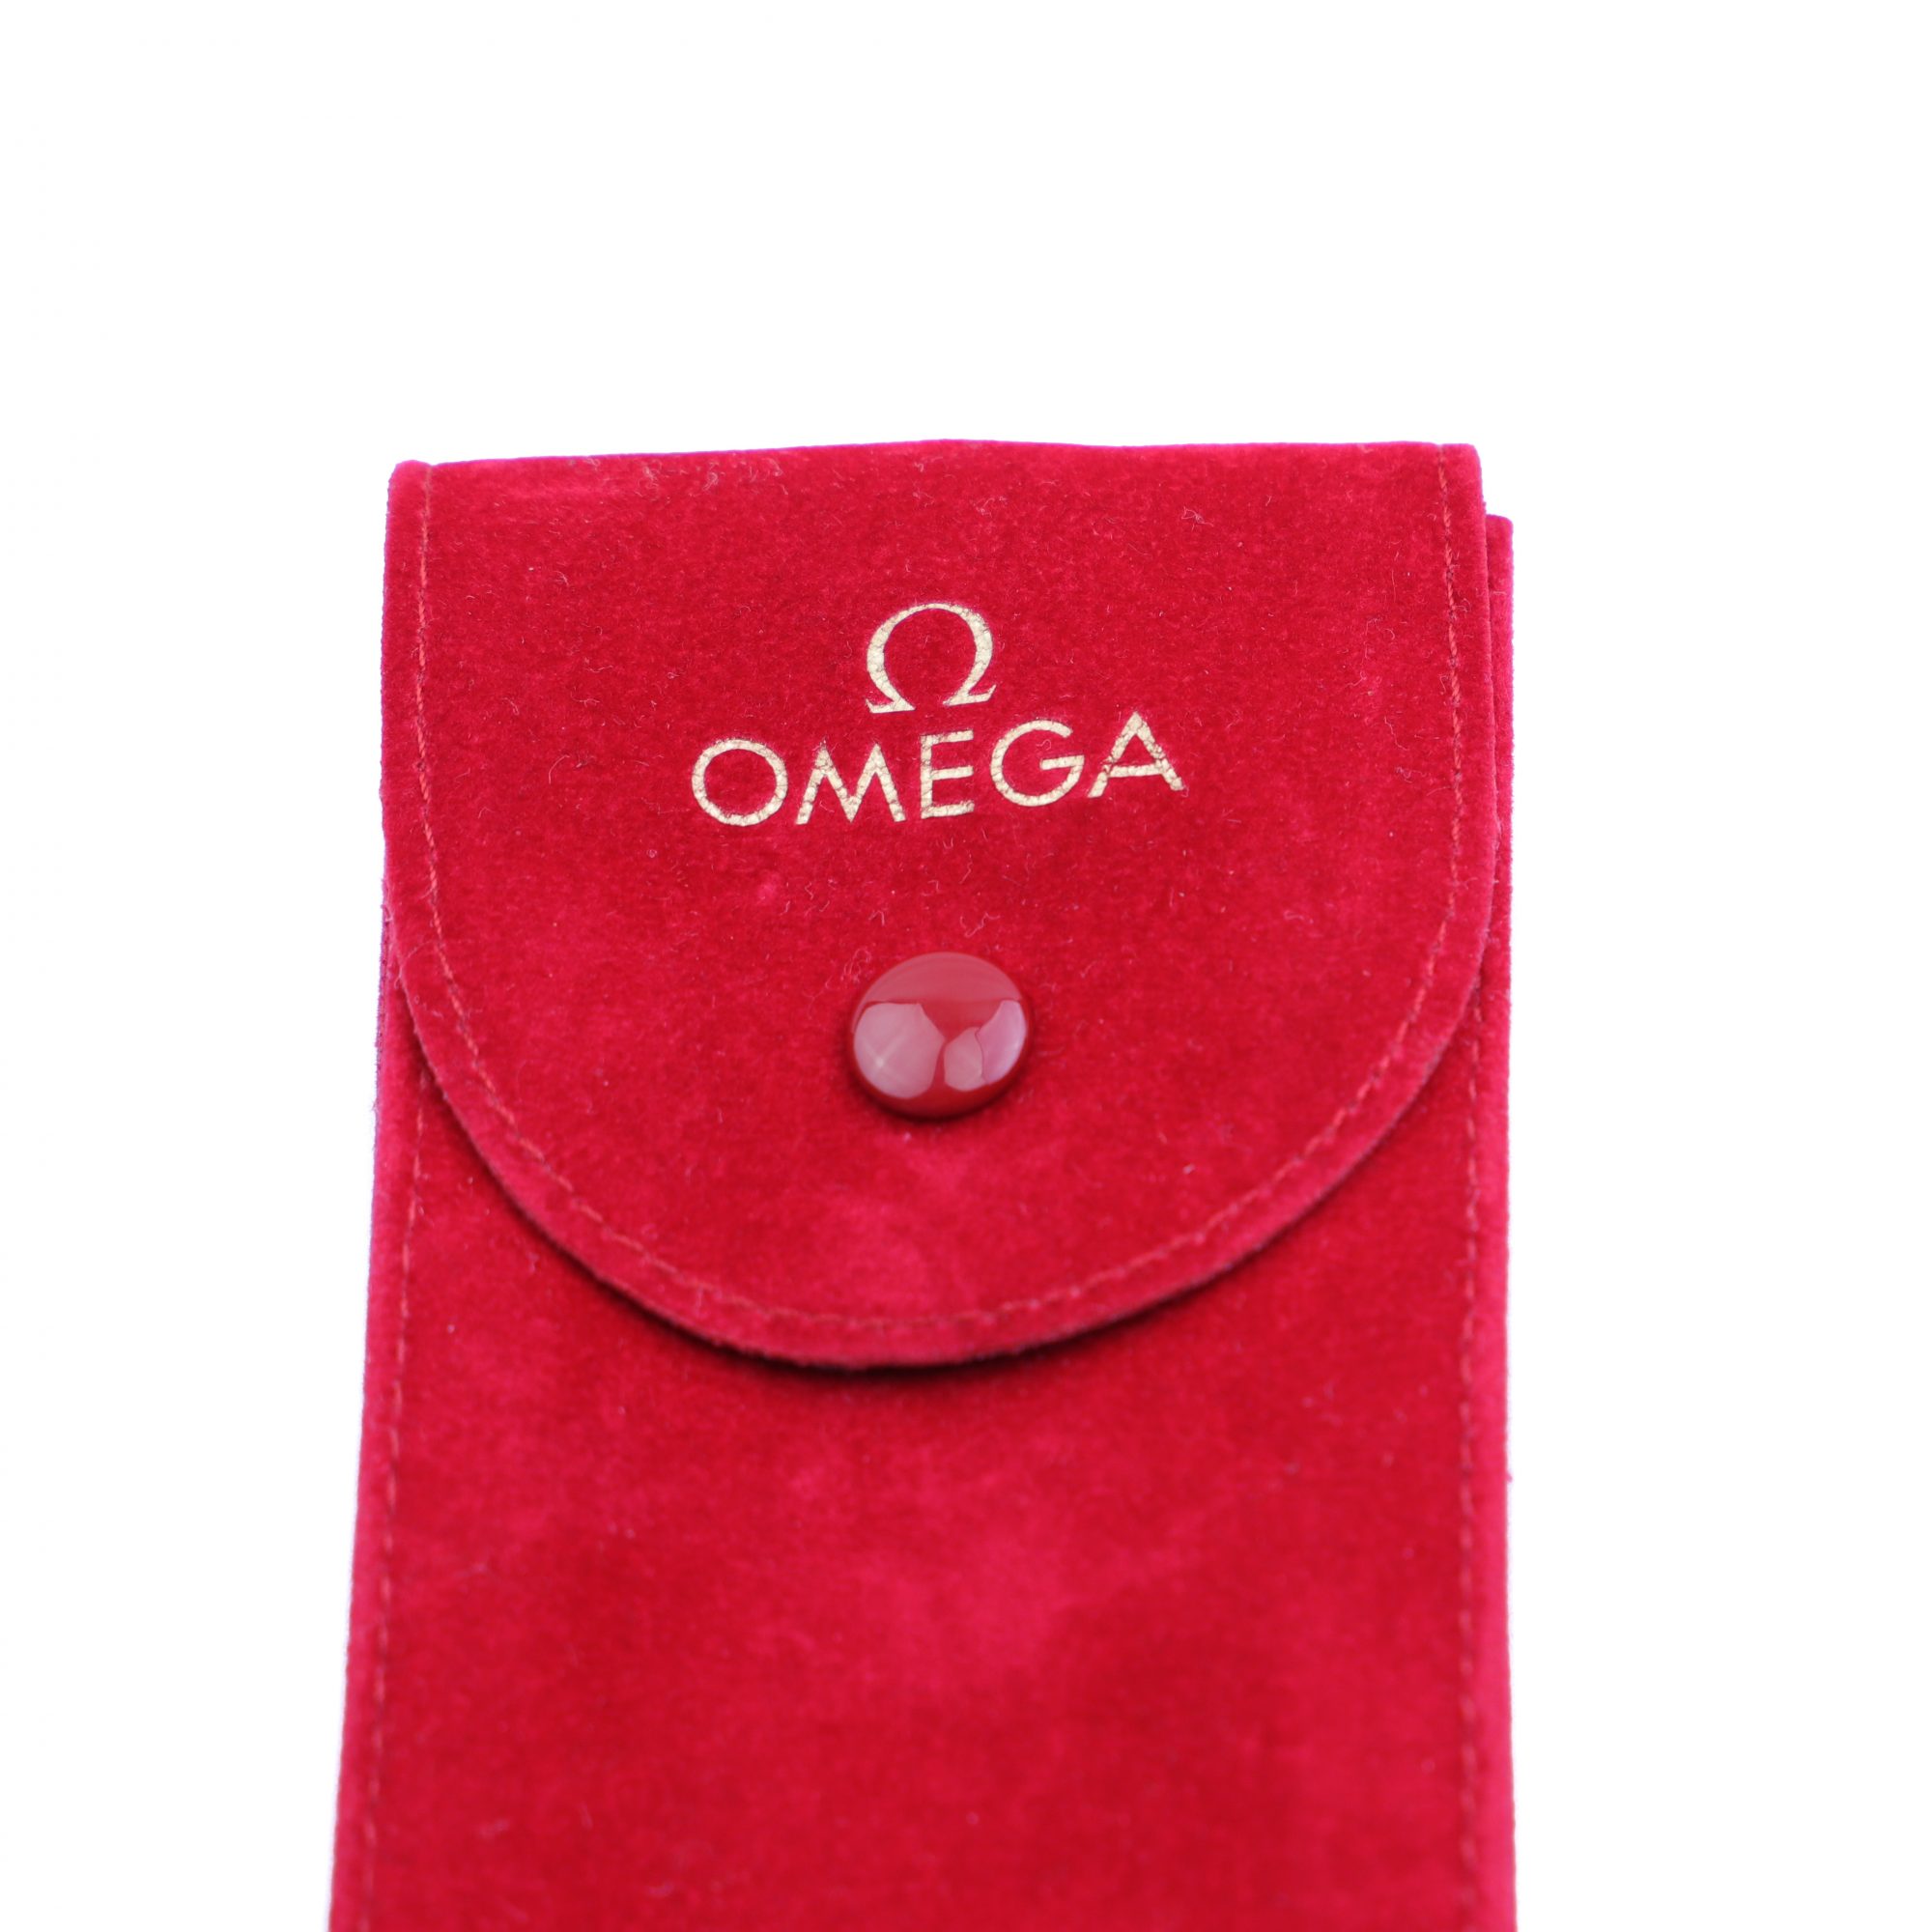 omega travel pouch